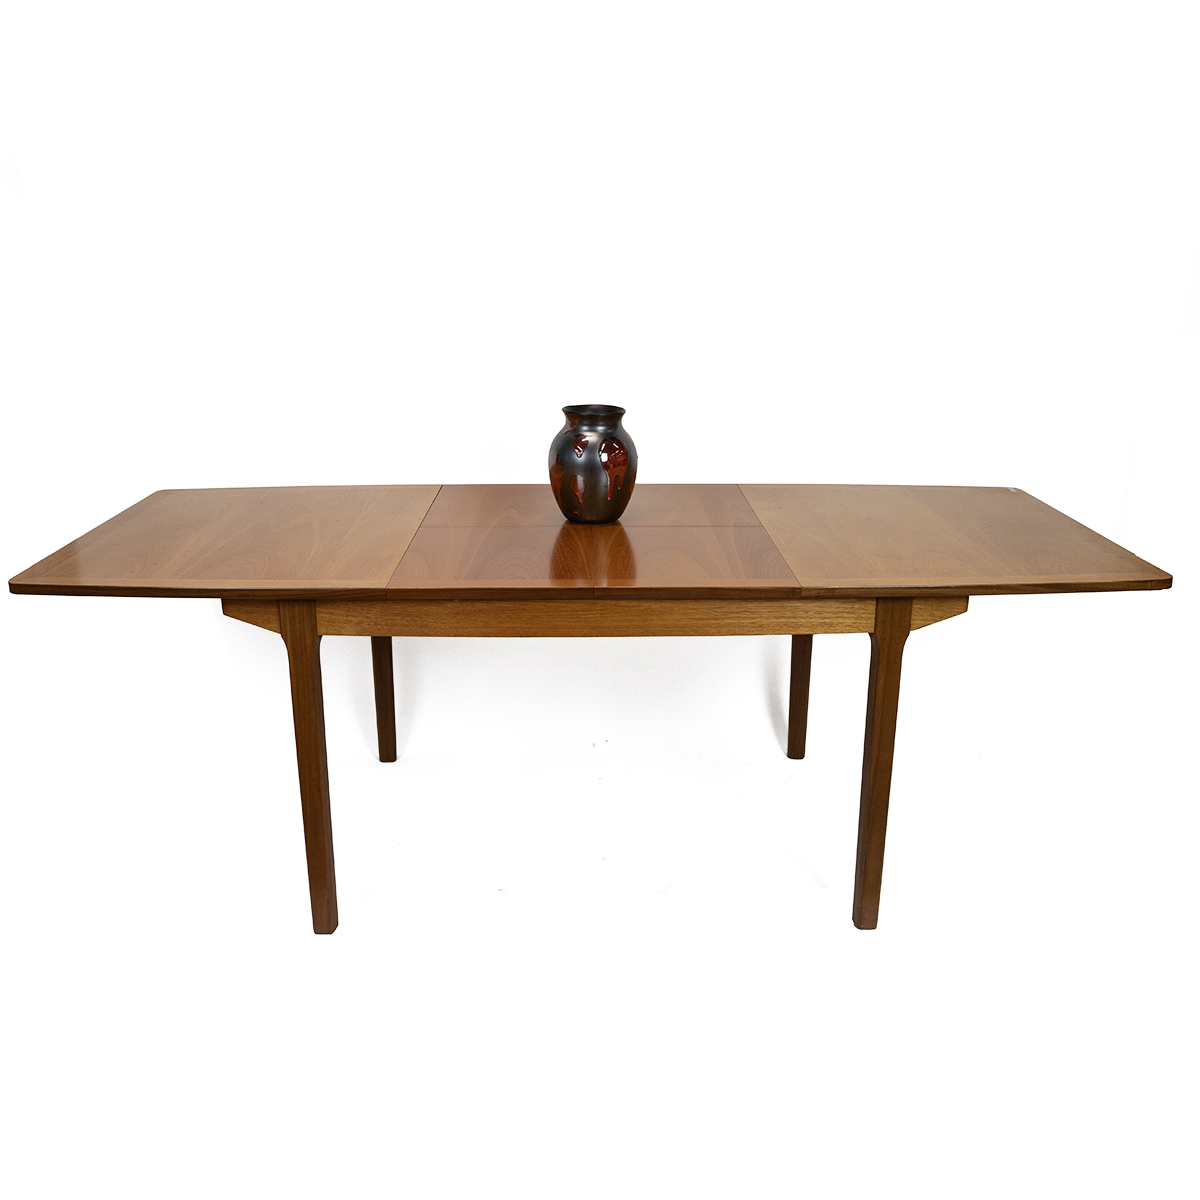 Mid century Nathan beech wood extending dining table and four chairs with three additional chairs... - Image 5 of 6